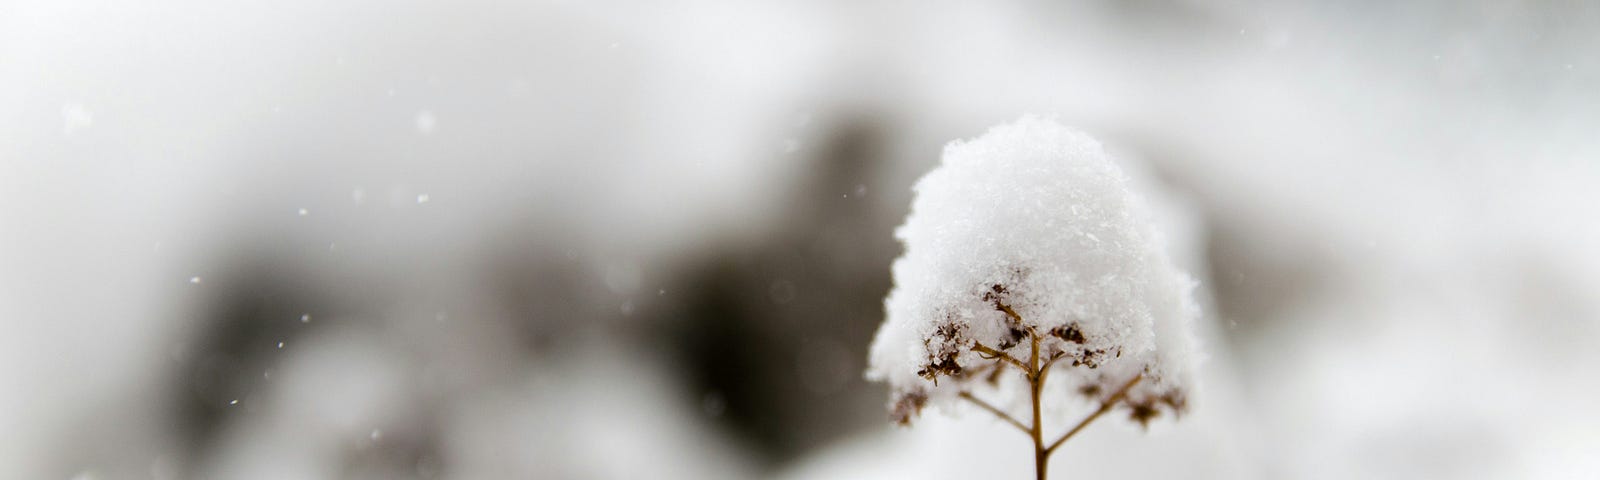 Photo of a lone weed in the foreground with a small mound of snow on top of it with a muted background of snow.